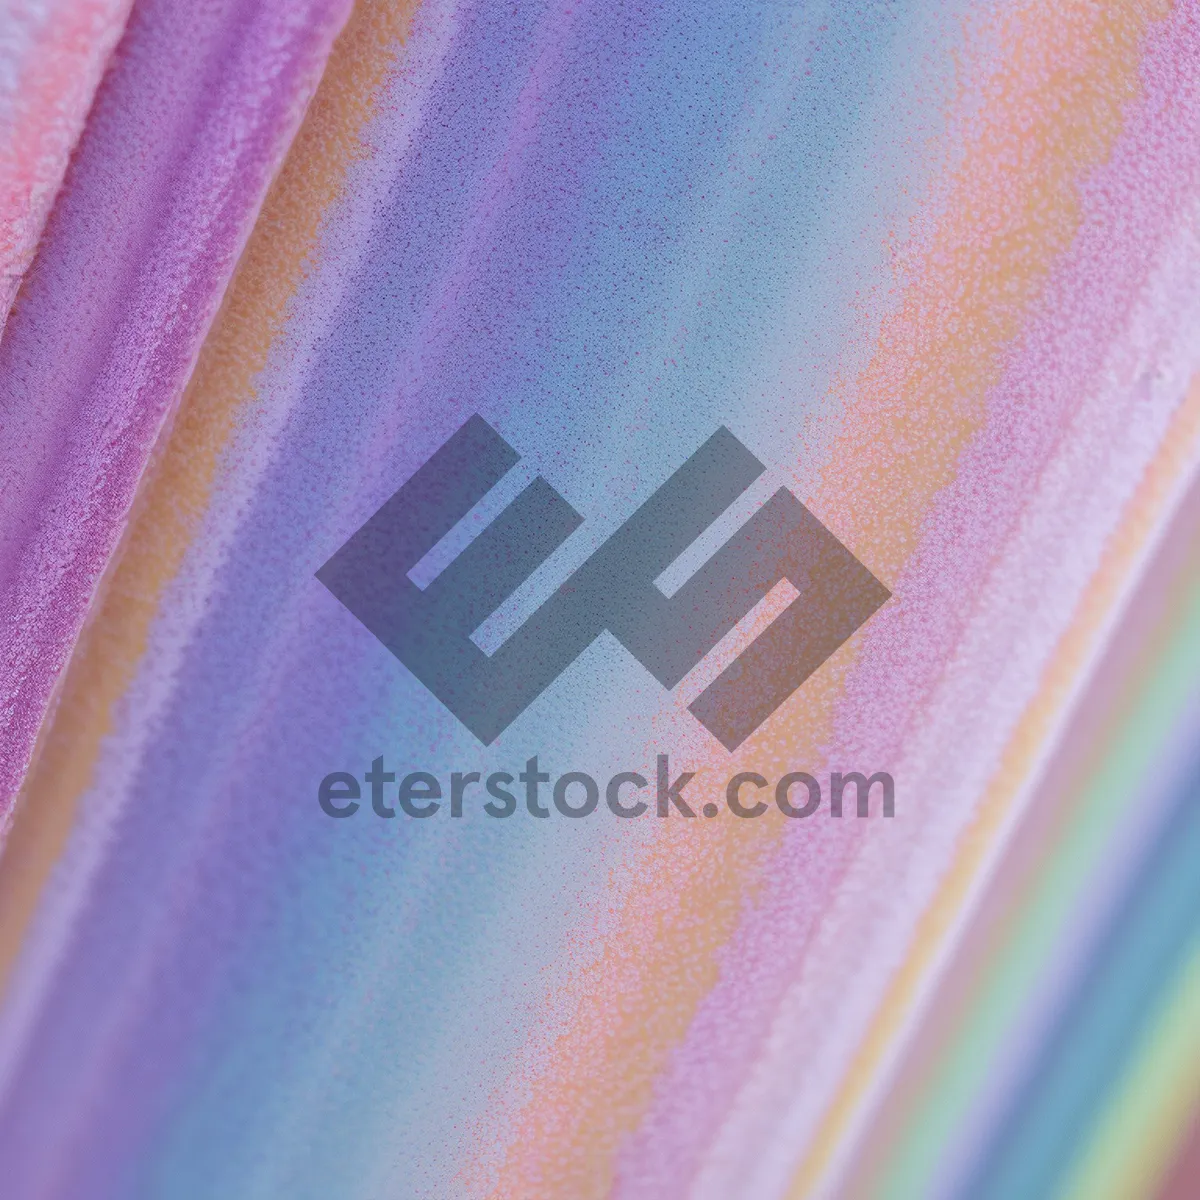 Picture of Satin Rainbow Motion: Colorful Artistic Fractal Design